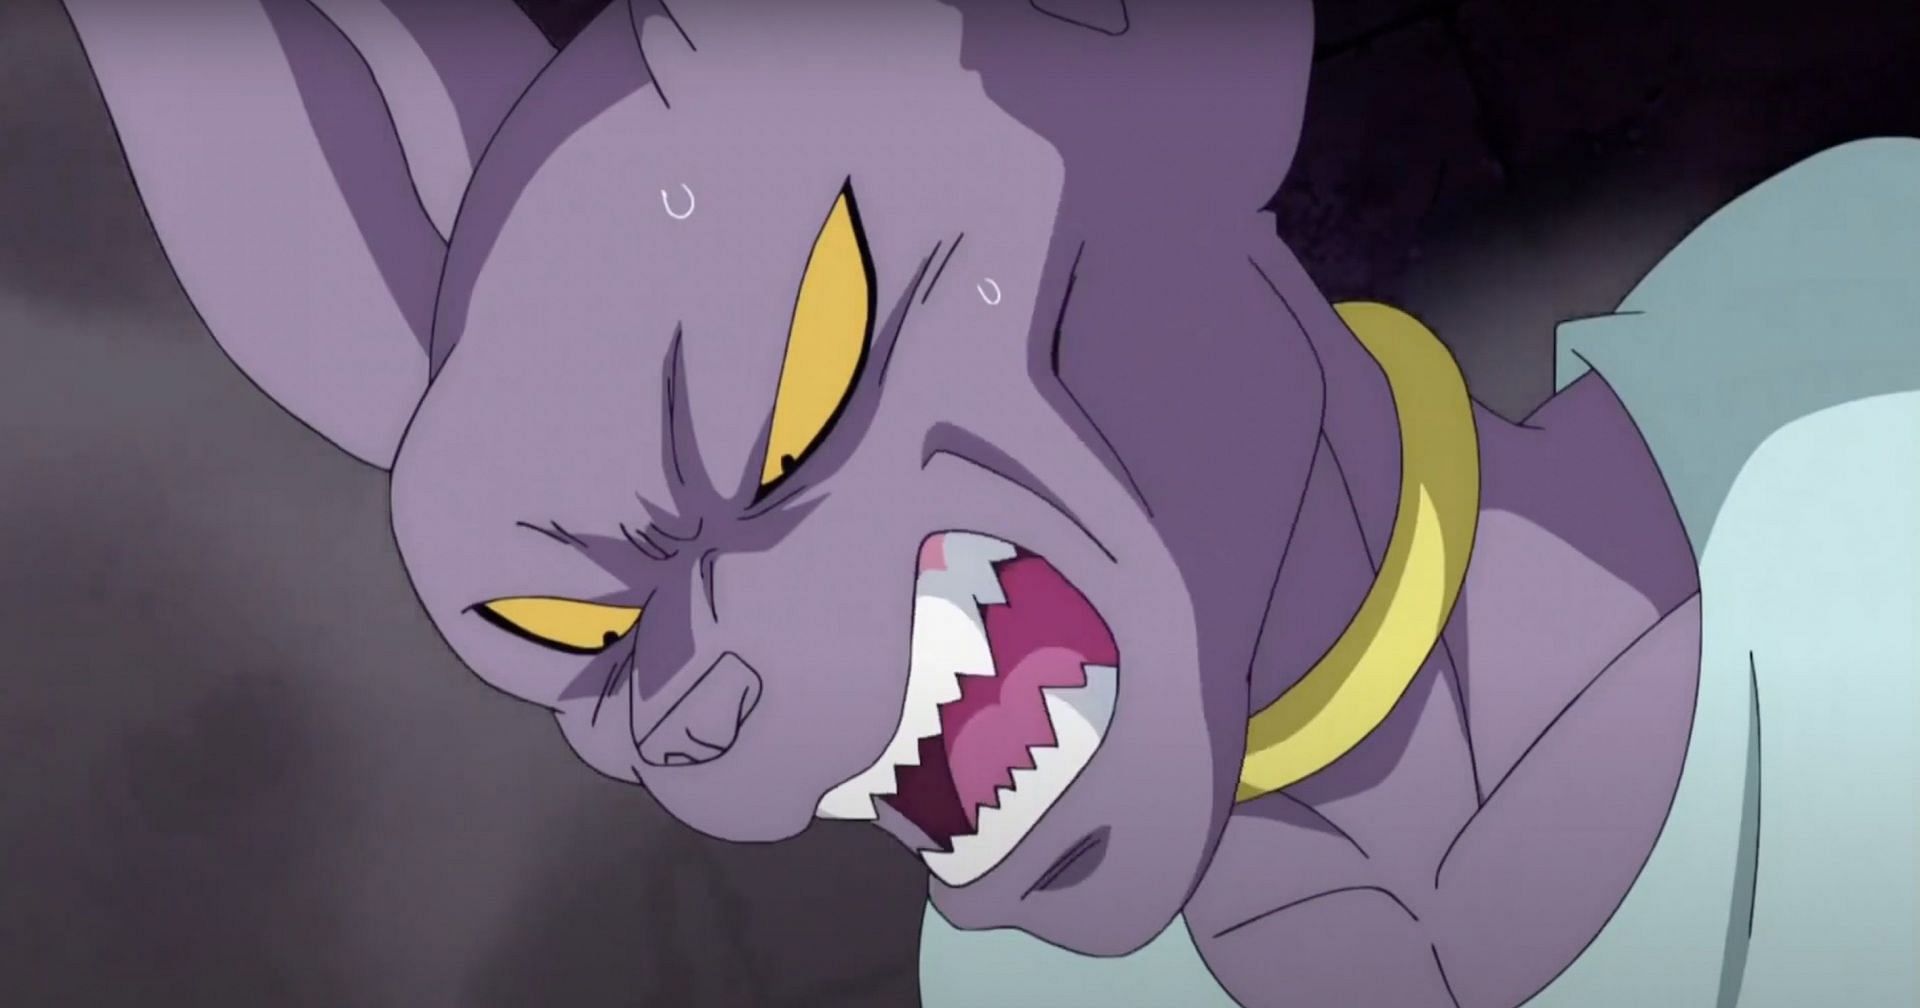 Beerus is angry after continuously being woken up by Goku and Vegeta (Image via Studio Pierrot)